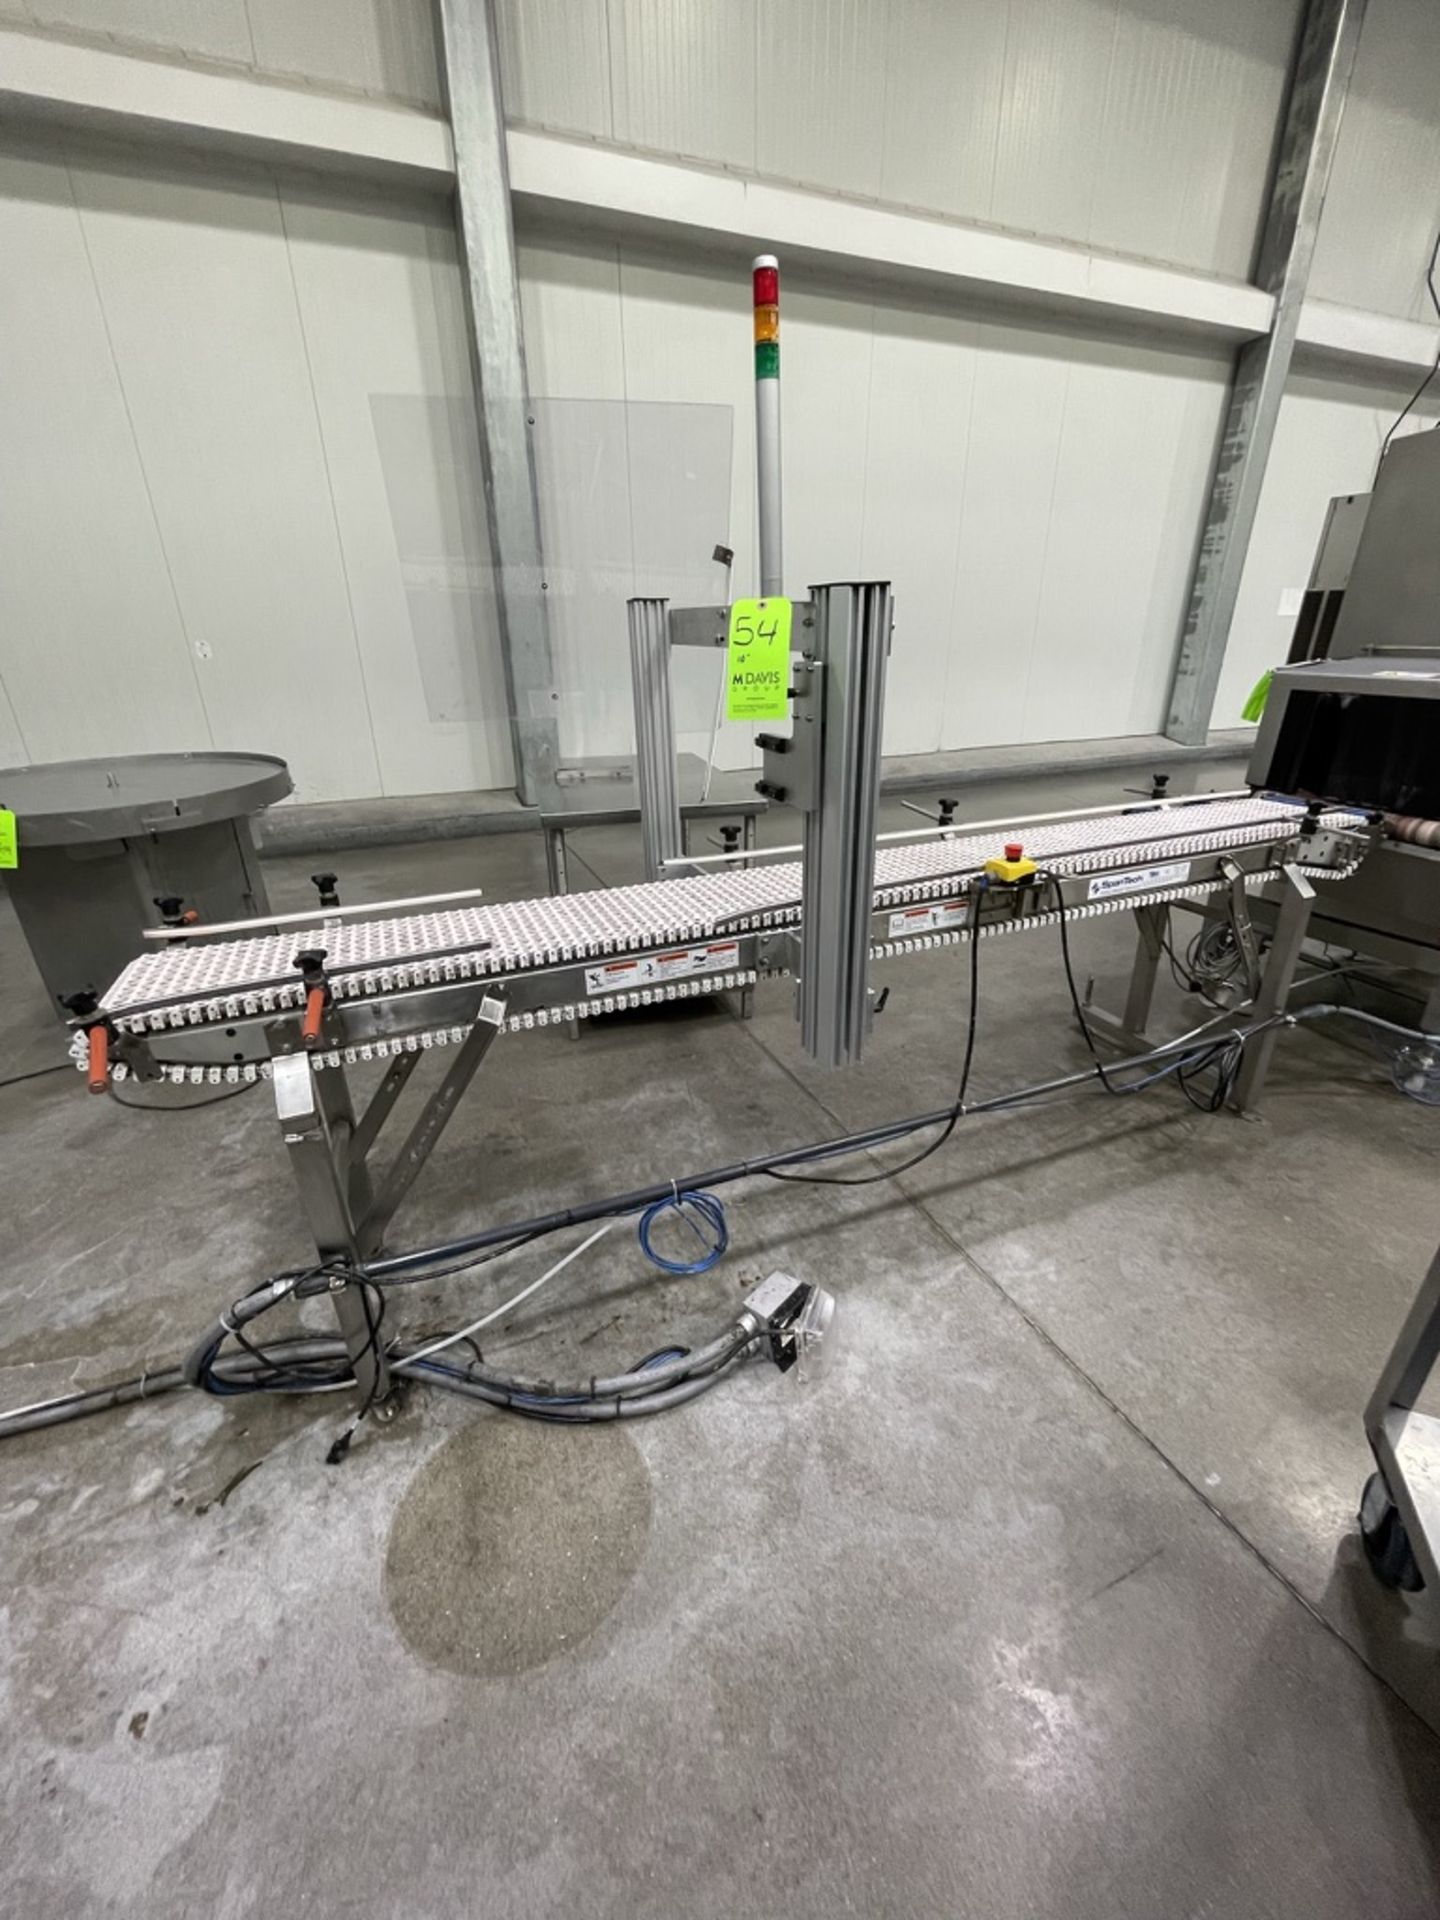 SPANTECH 10' X 12"" W CONVEYOR(INV#84339)(Located @ the MDG Auction Showroom 2.0 in Monroeville, PA) - Image 2 of 4